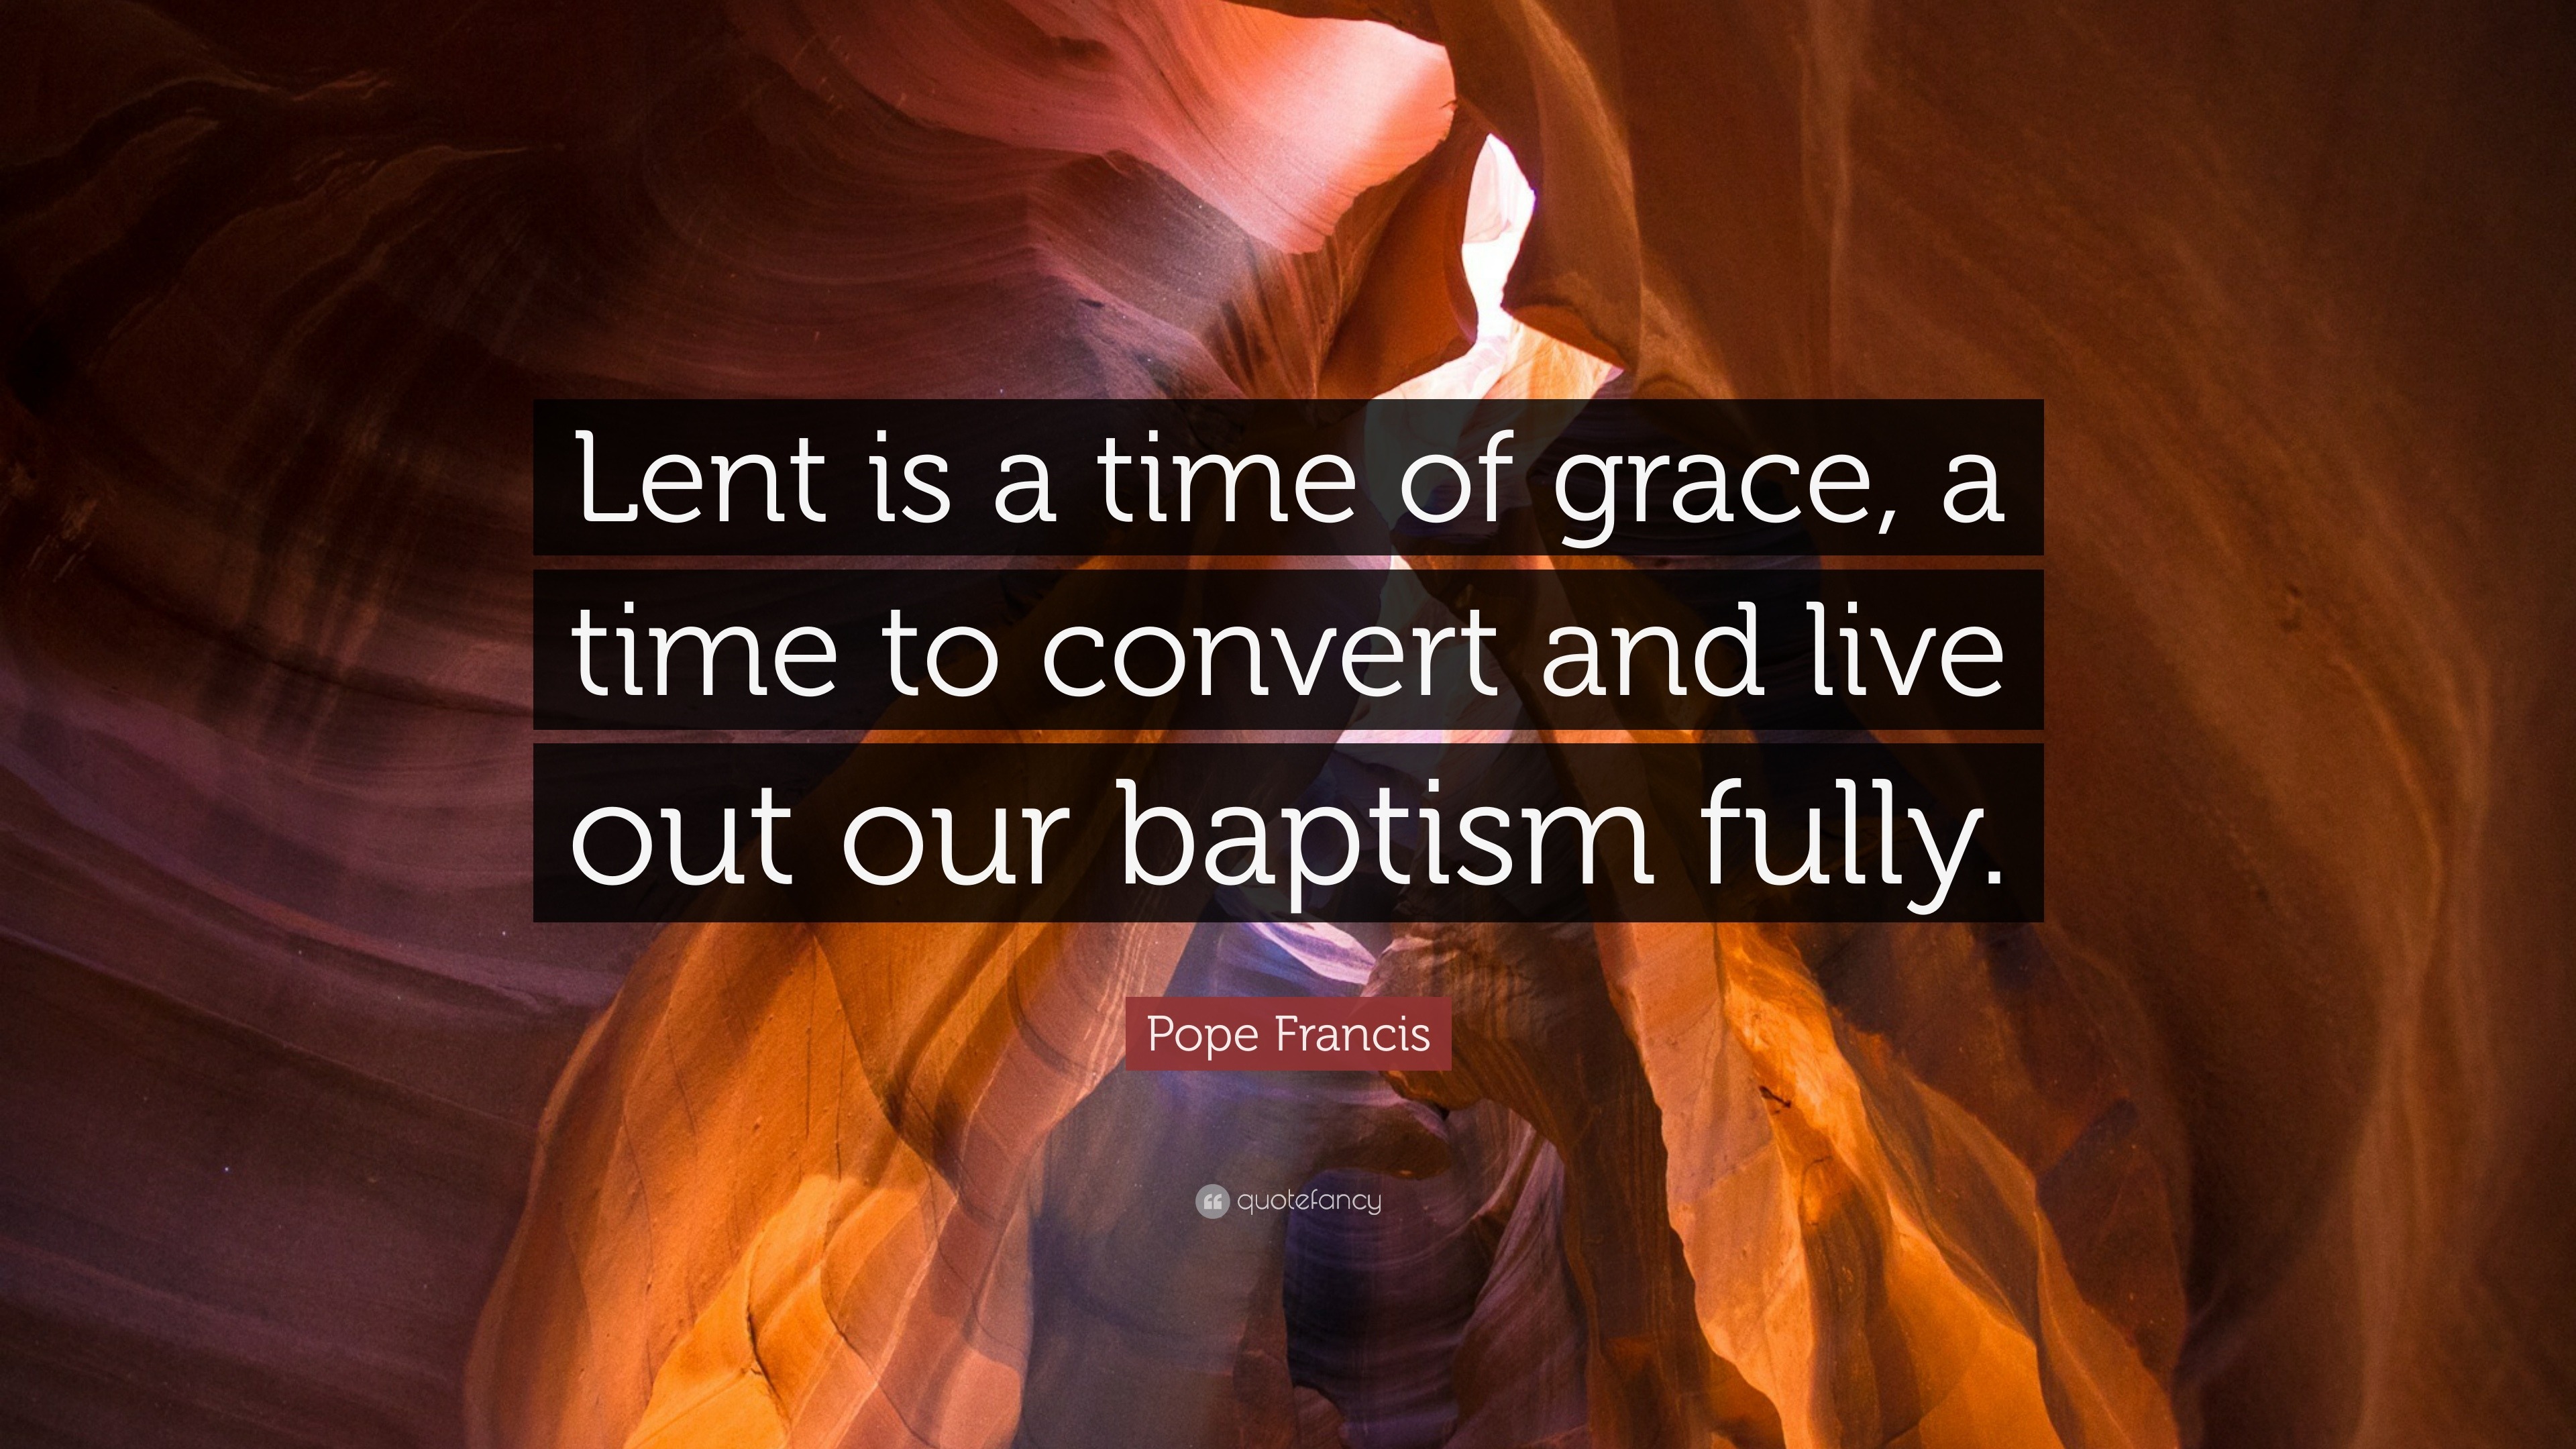 Pope Francis Quote “lent Is A Time Of Grace A Time To Convert And Live Out Our Baptism Fully”